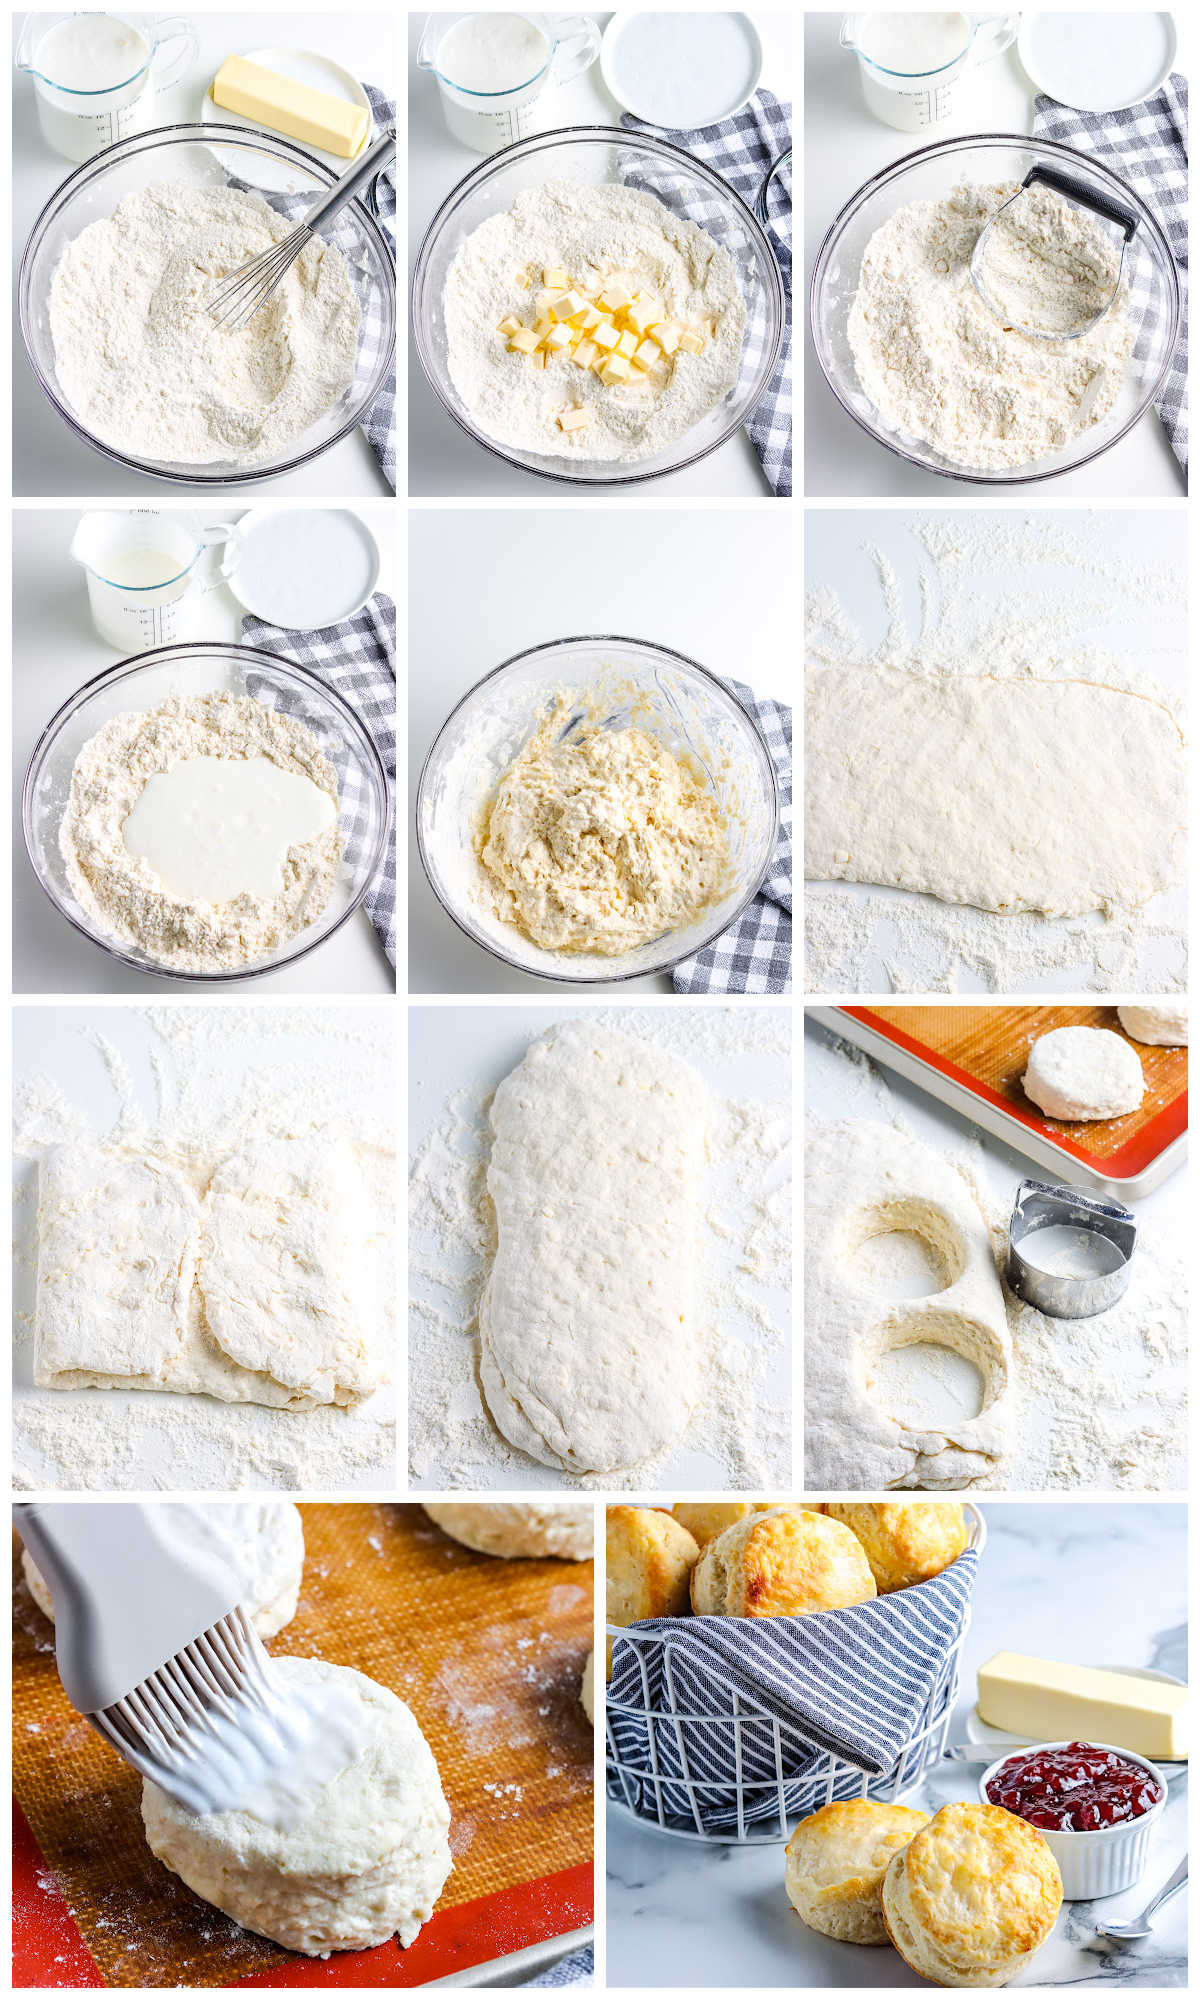 A picture collage showing how to make this Buttermilk Biscuit recipe.